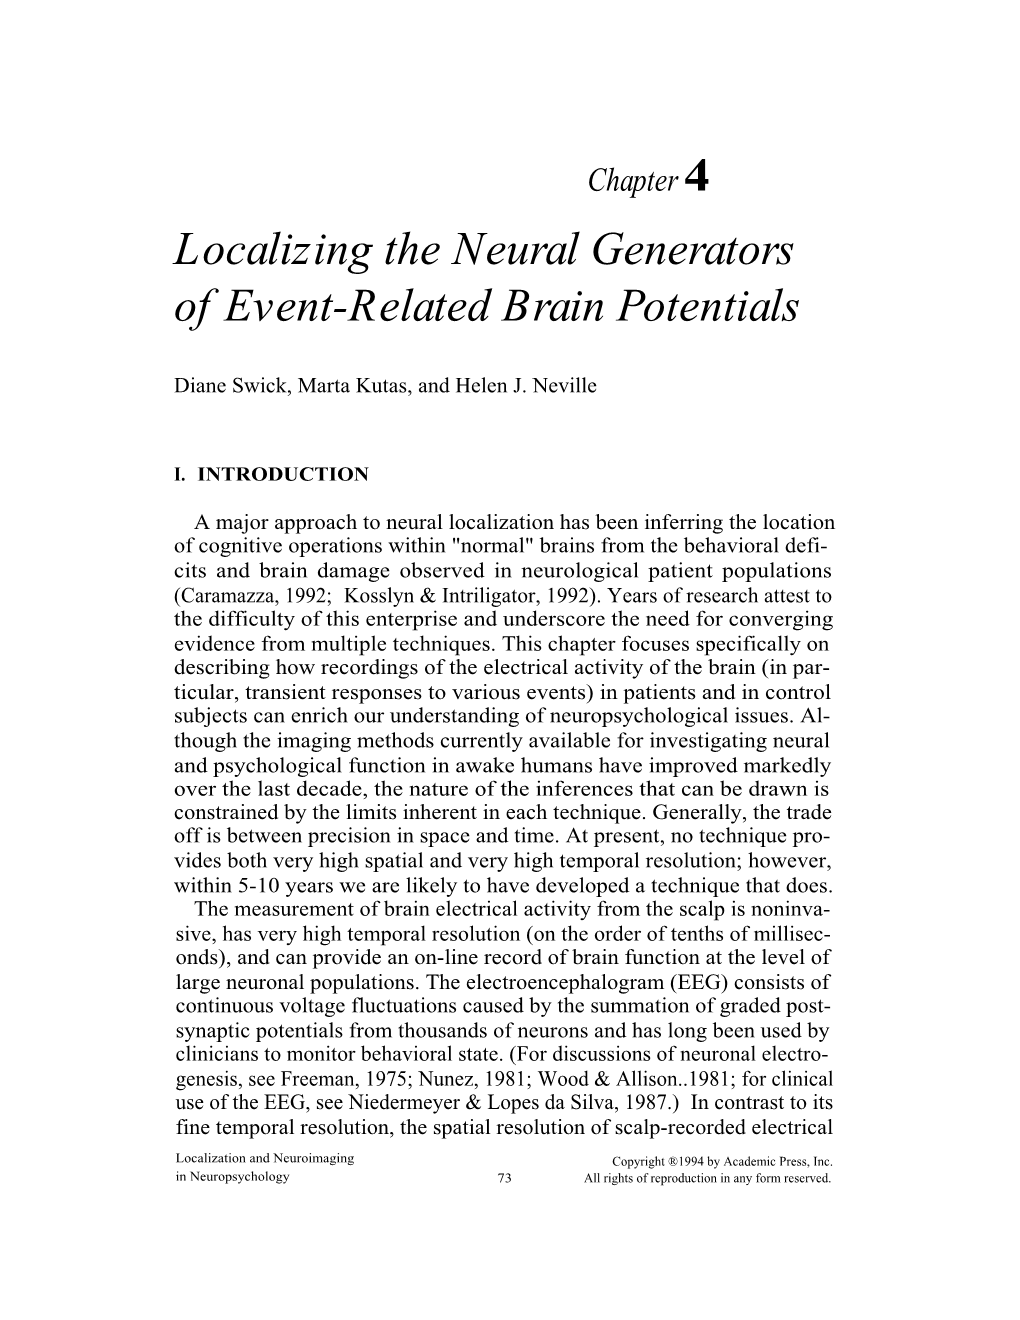 Localizing the Neural Generators of Event-Related Brain Potentials